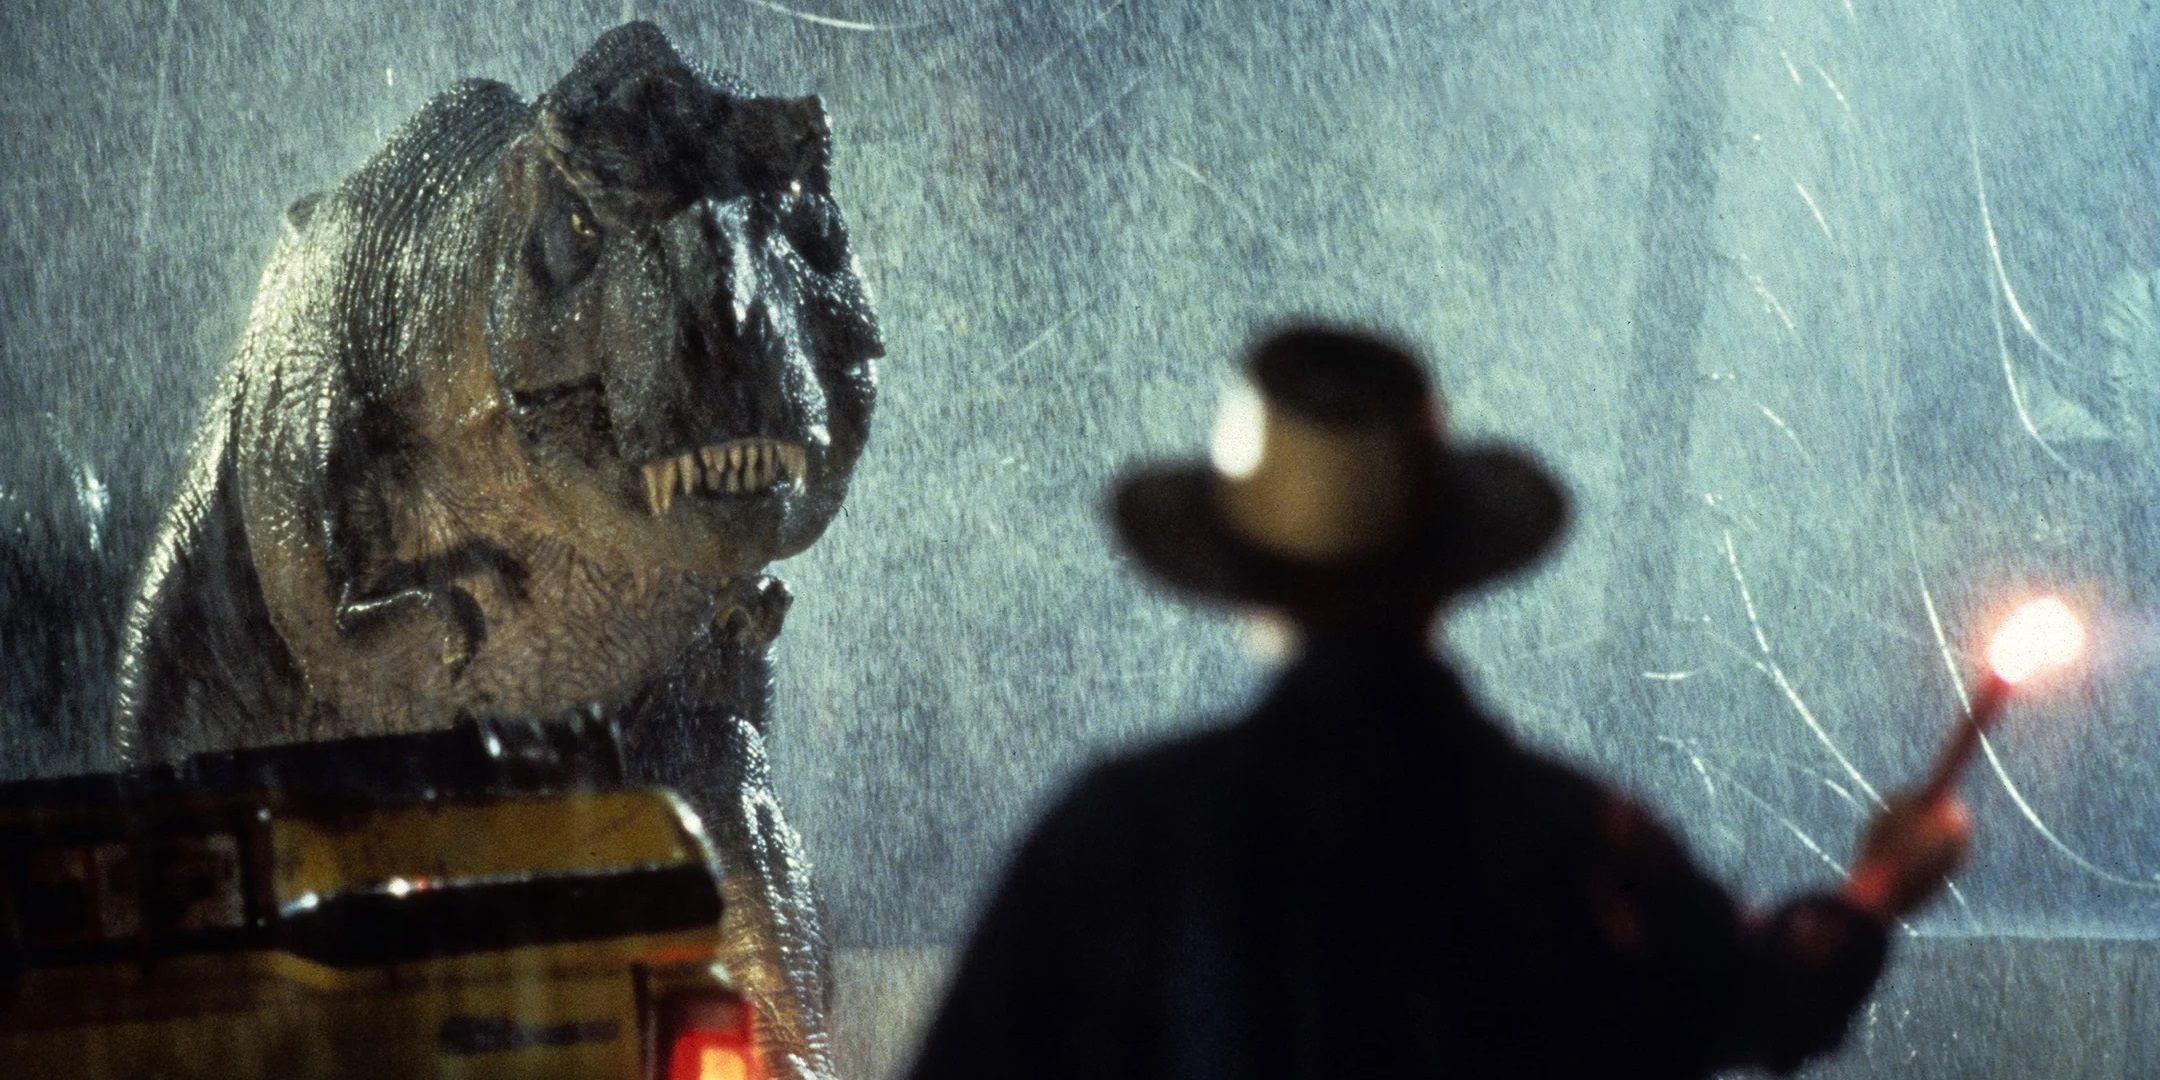 movie review of jurassic park